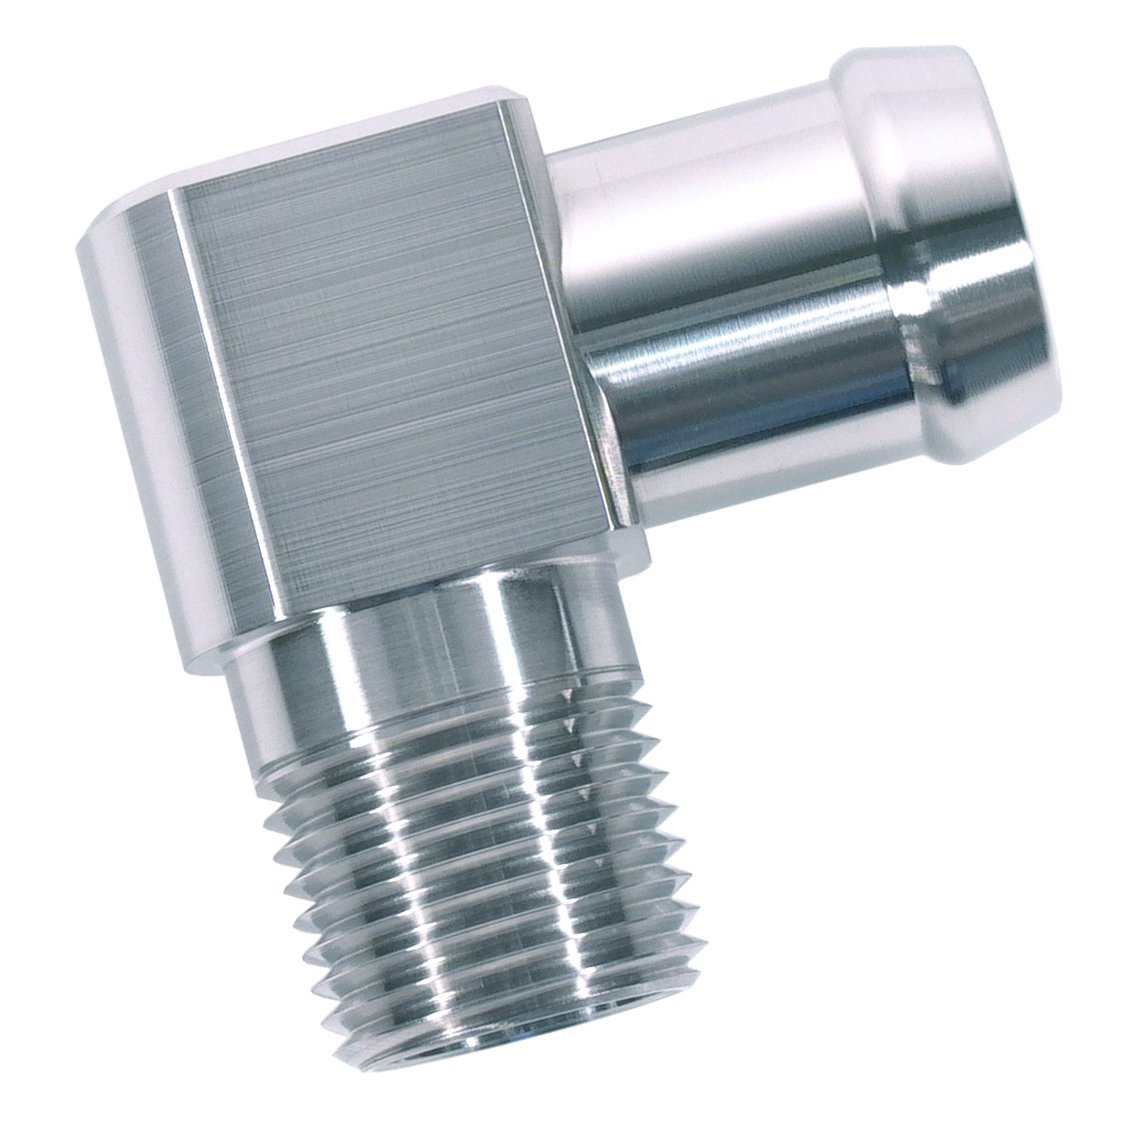 Heater Hose Fitting, 90-Degree, 1/2 in. NPT x 3/4 in. Hose Barb, 1 3/4 in. Length [Natural Finish]